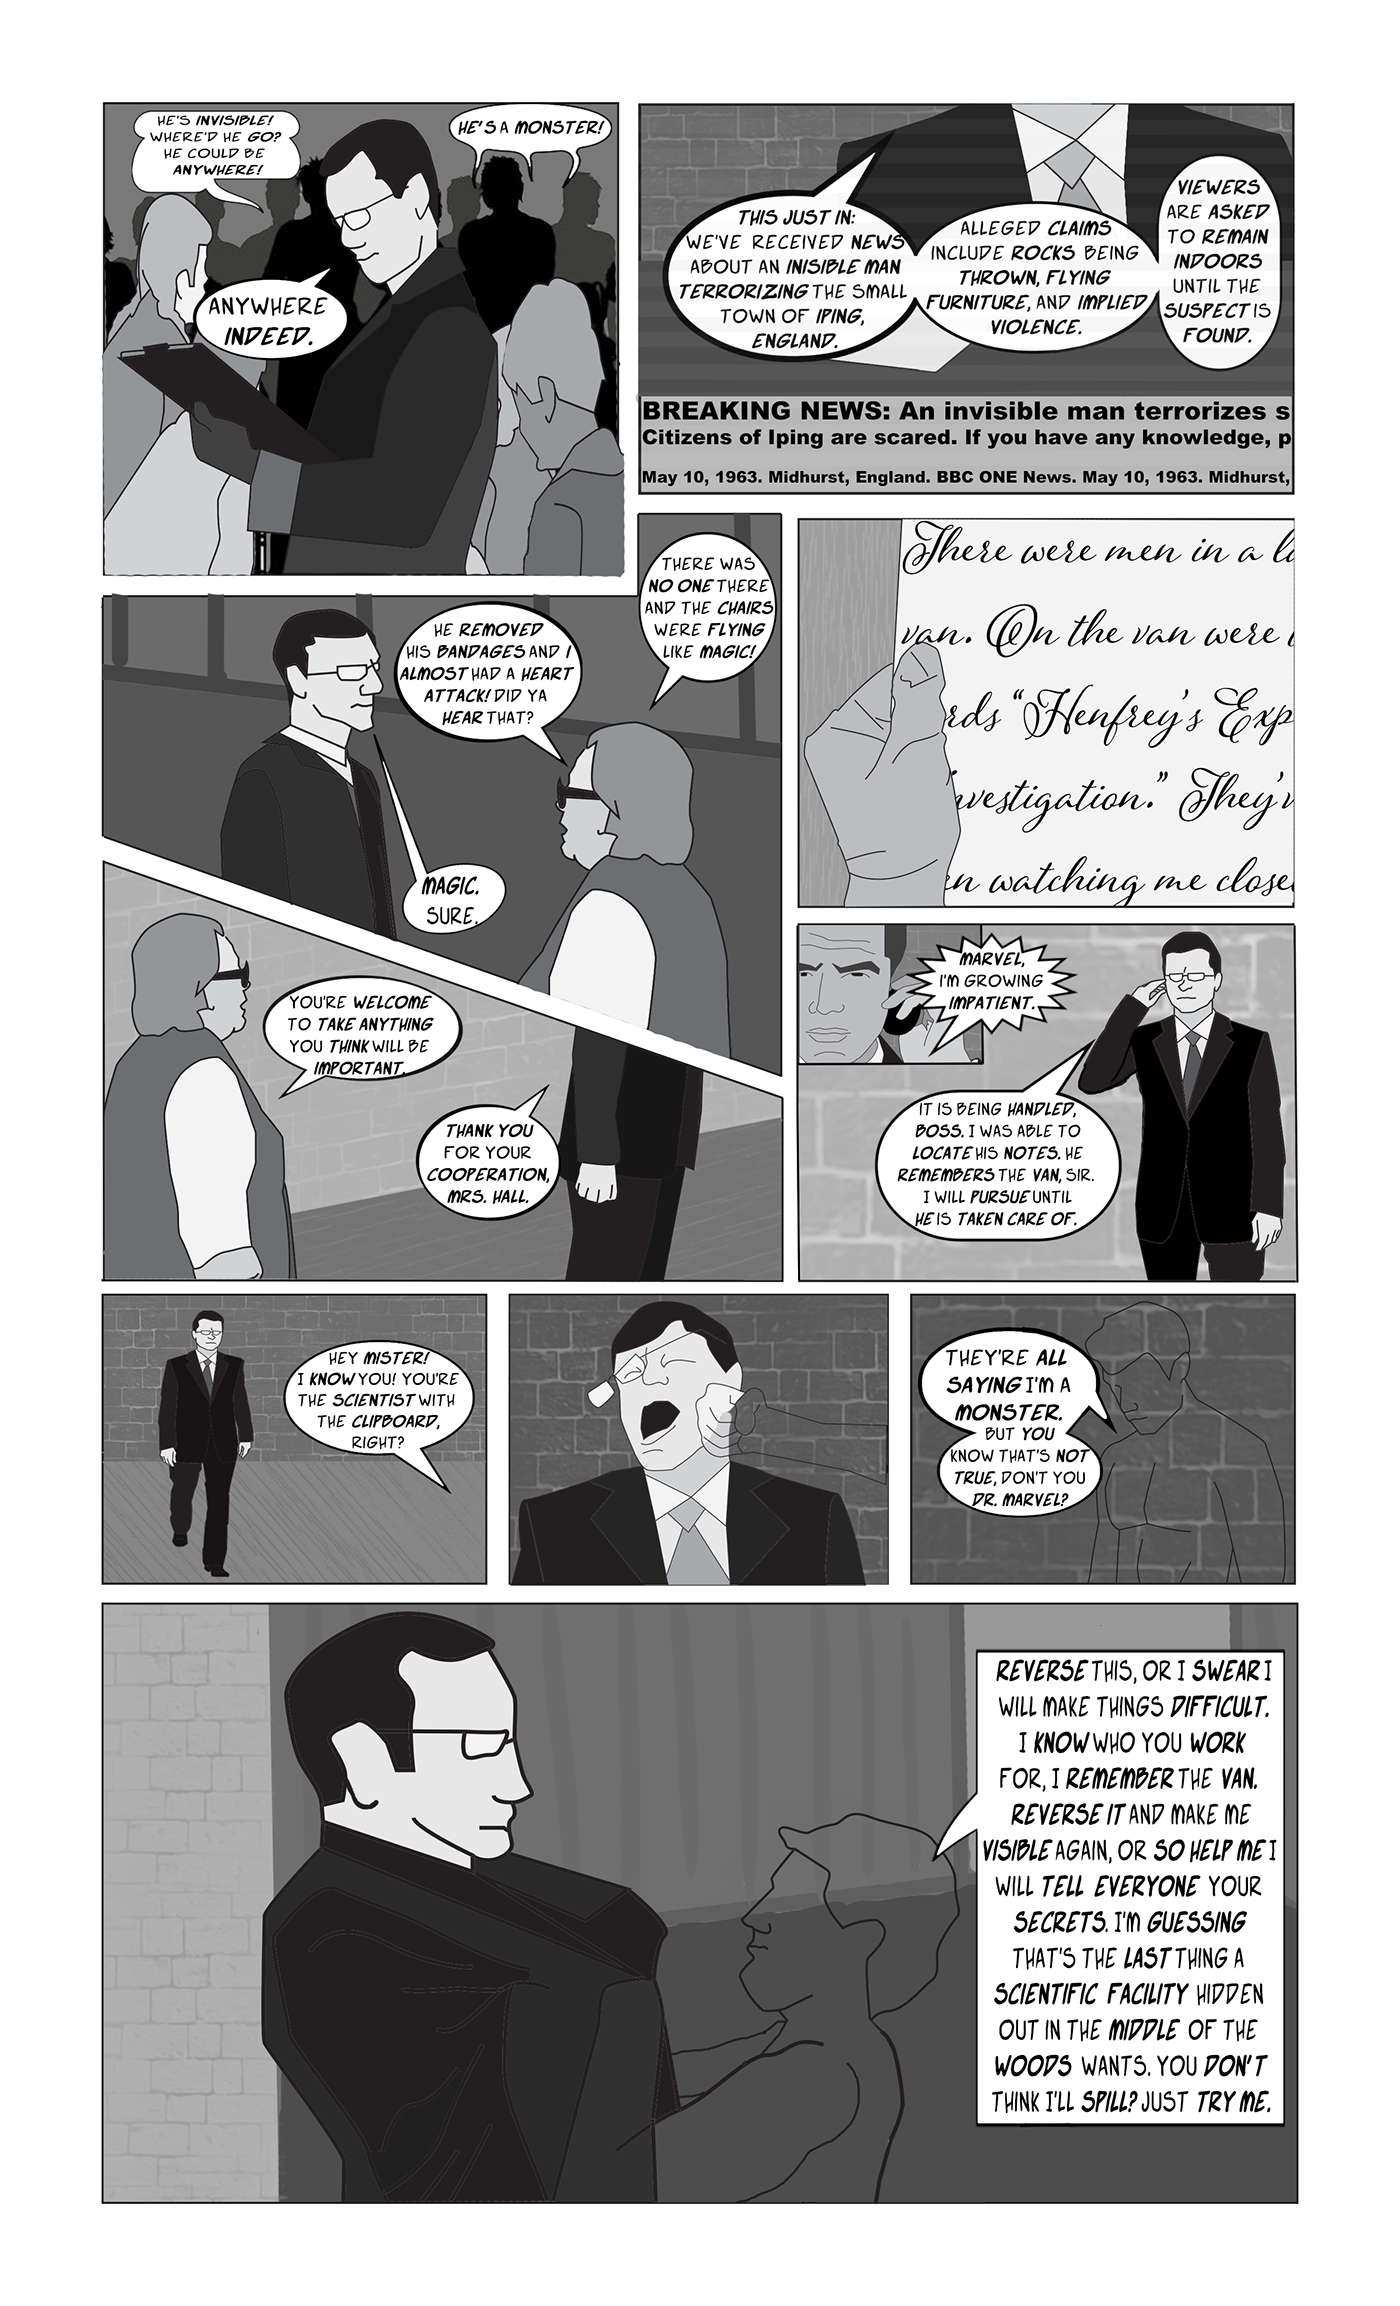 twilight zone Rod Serling The Invisible Man H.G. Wells short story Adaptation comic ILLUSTRATION 